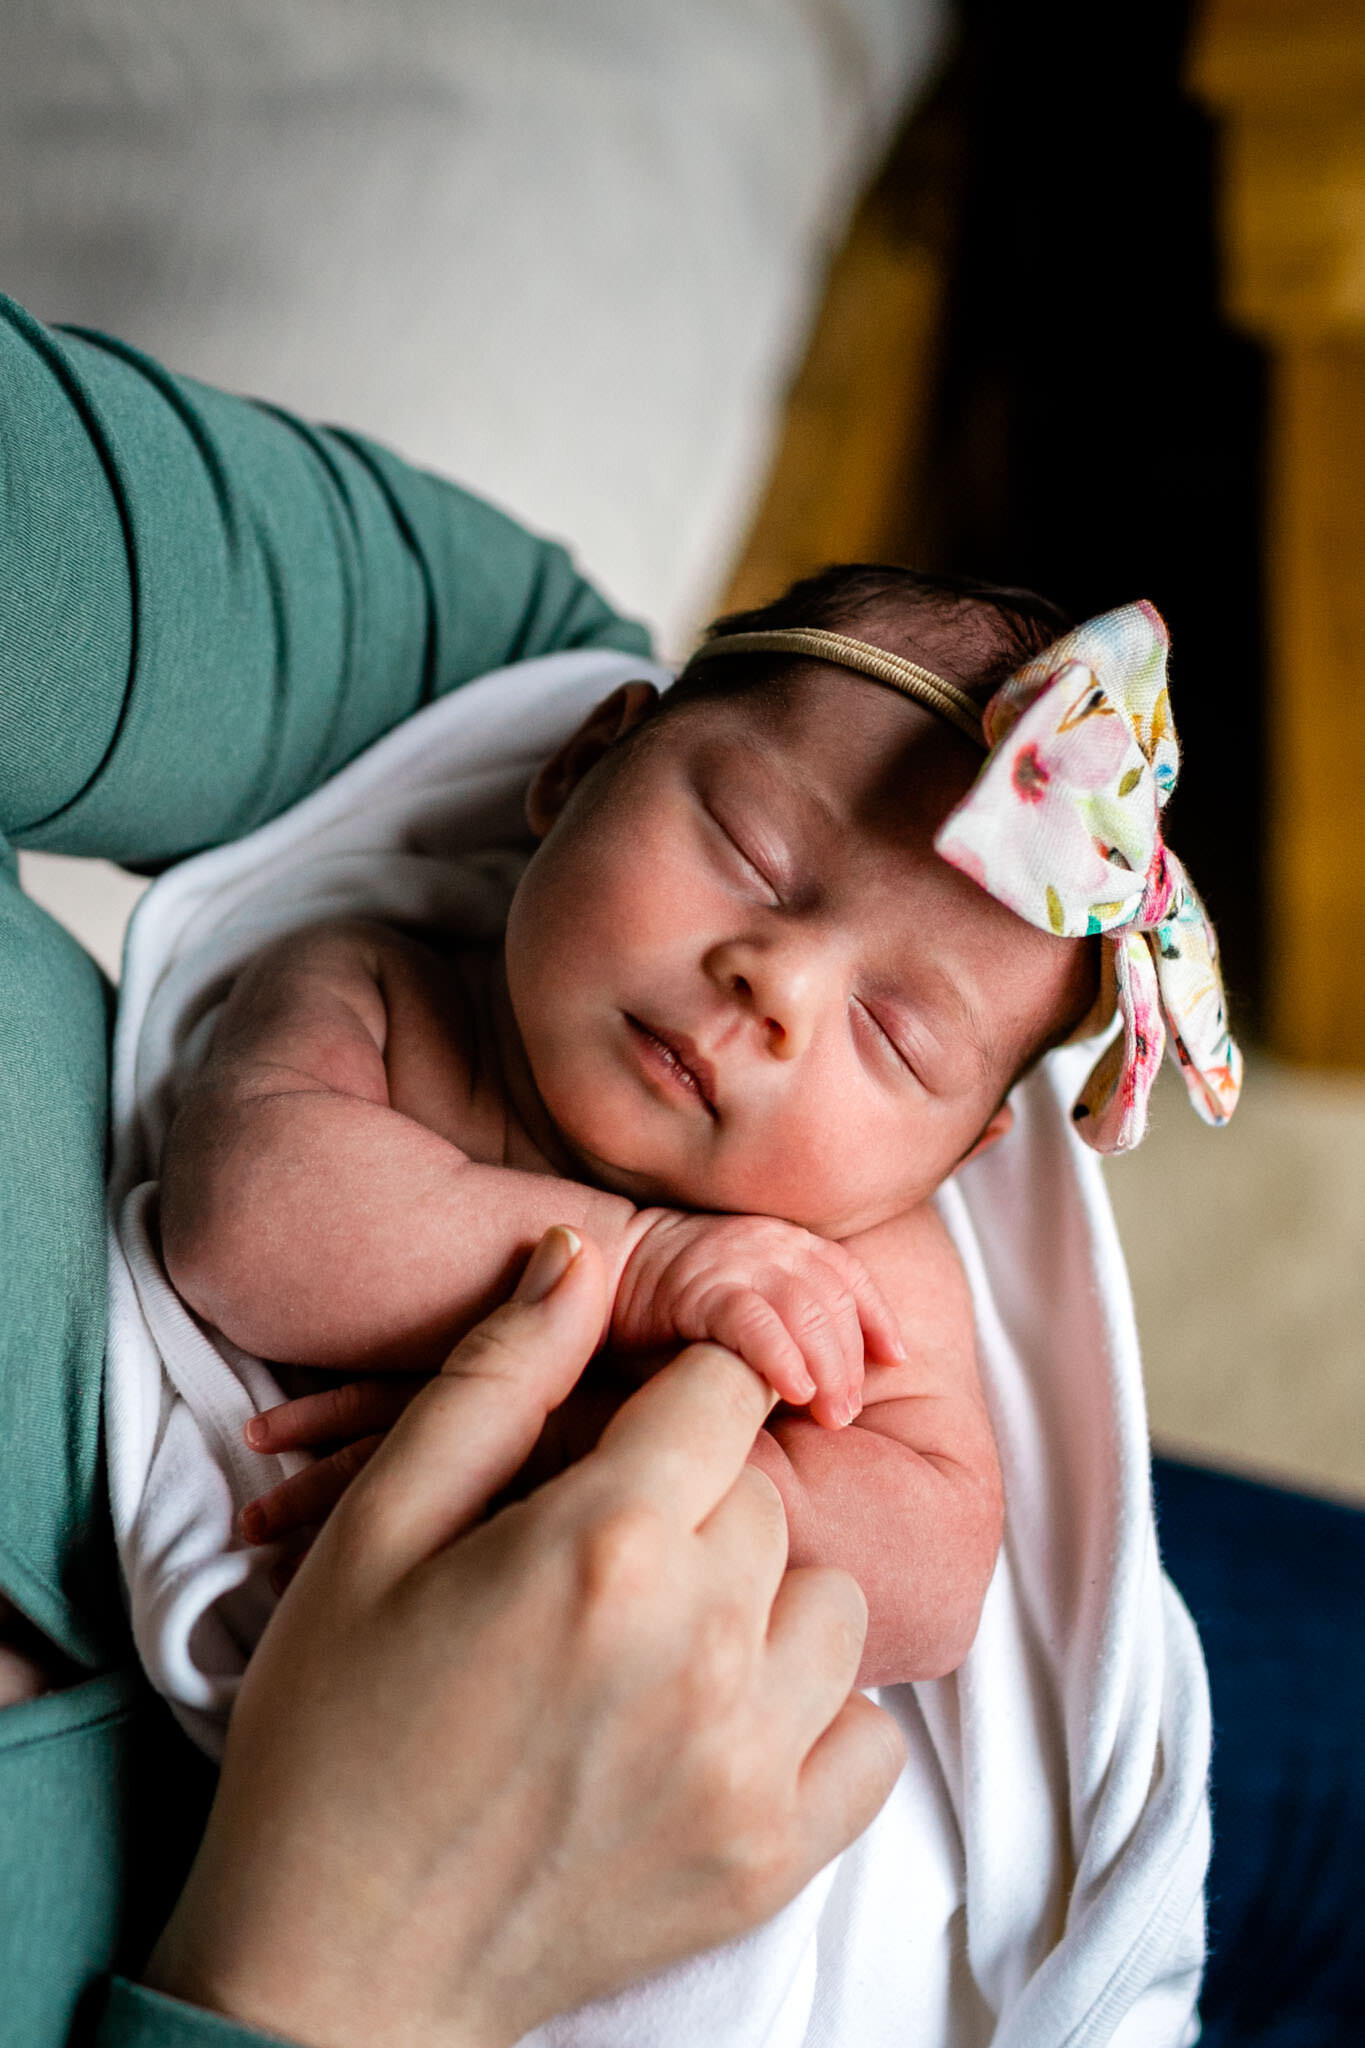 Durham Newborn Photographer | By G. Lin Photography | Close up candid photo of baby girl sleeping